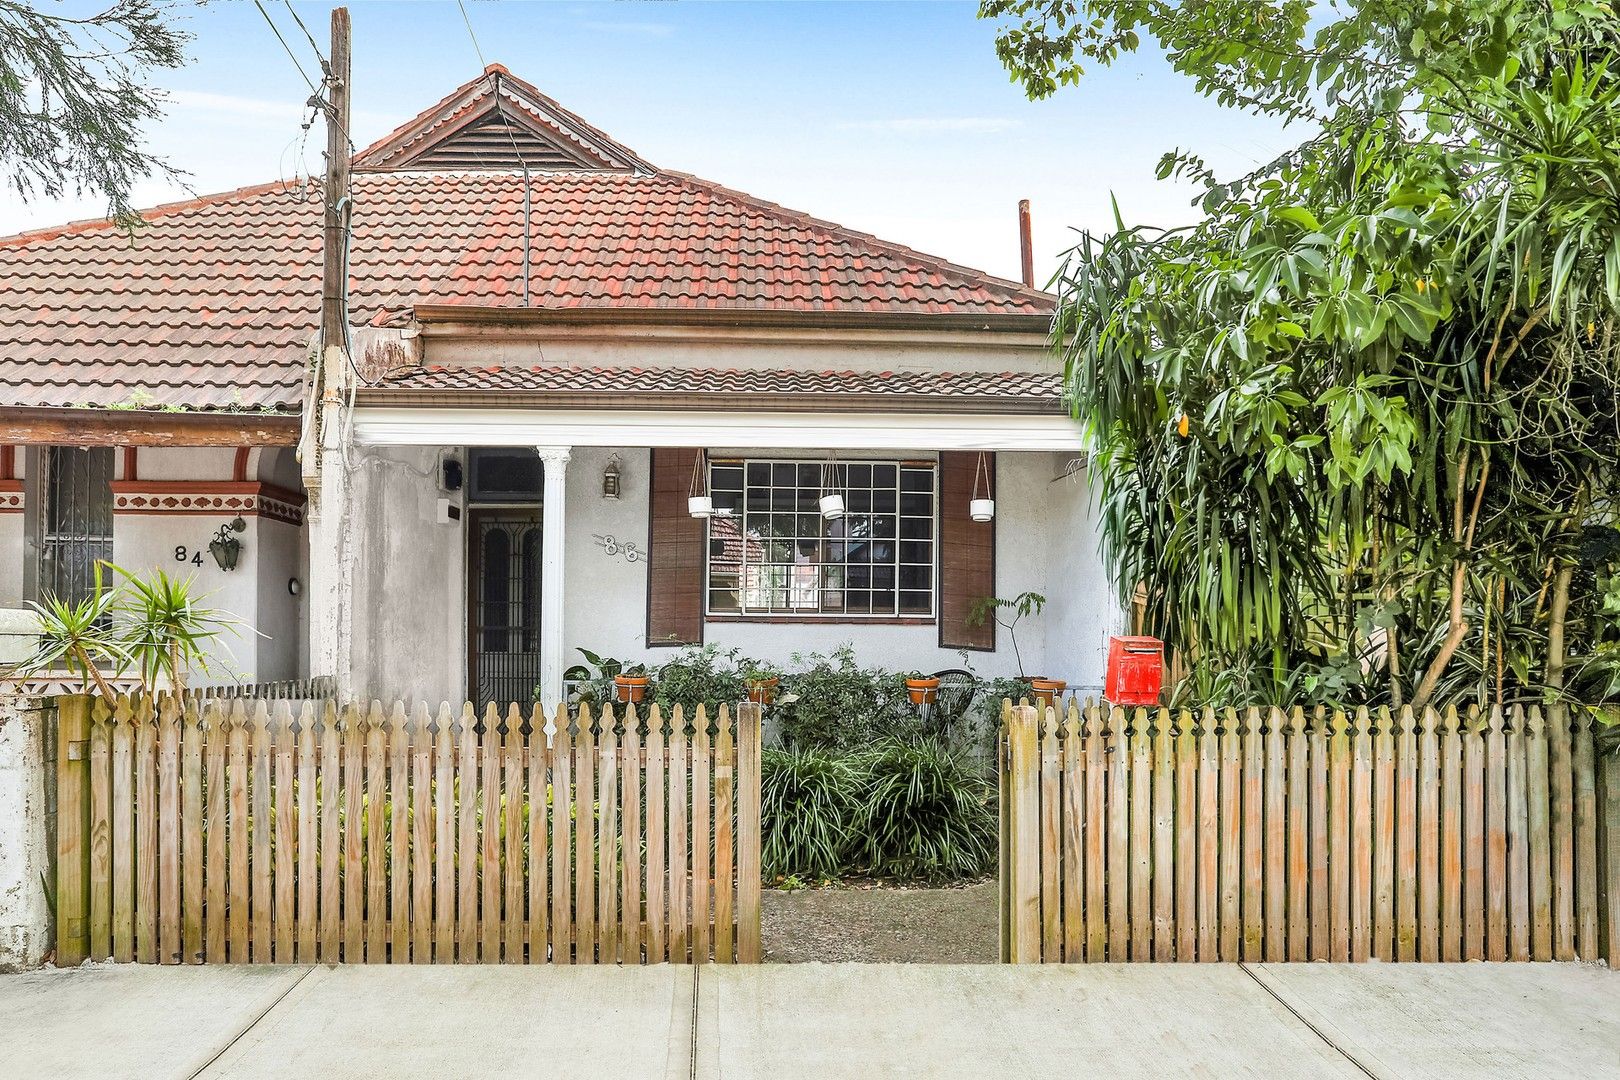 2 bedrooms Semi-Detached in 86 Silver Street ST PETERS NSW, 2044